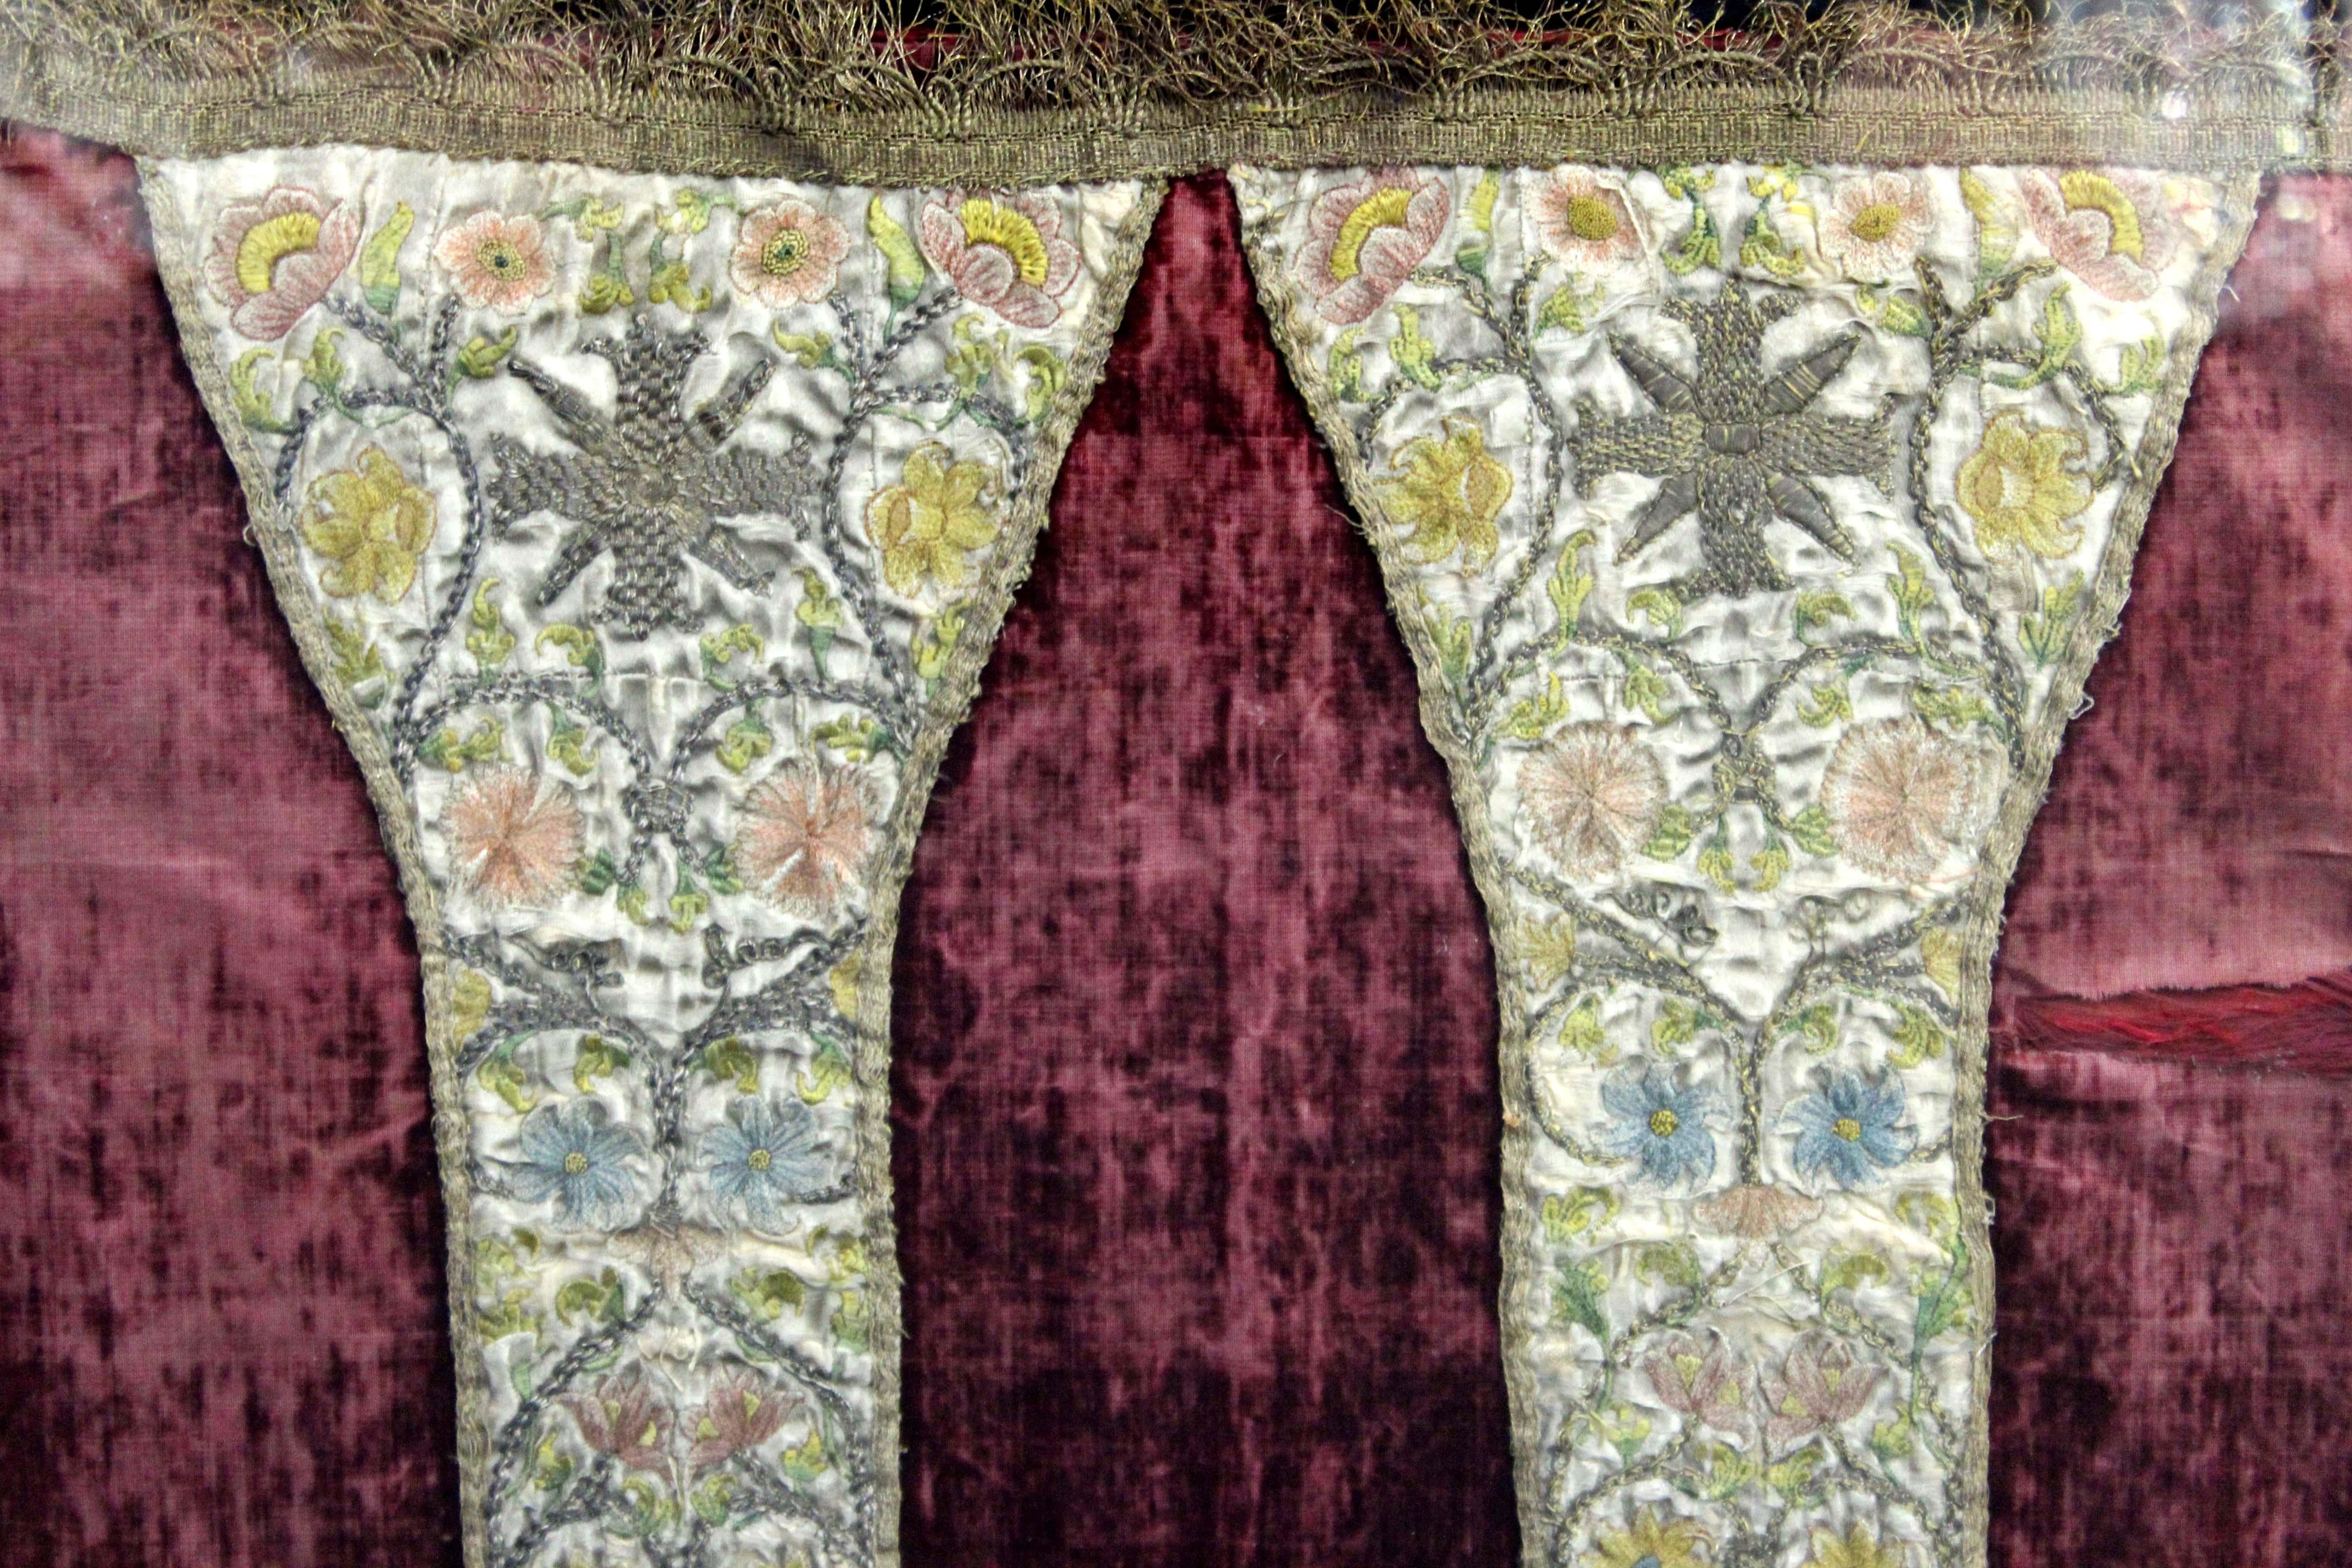 Antique embroidered textile chasuble with floral decorative patterns in blue, yellow and pink, likely made in the 17th-18th century in Europe. The piece is framed and has marking on the back paper indicating it to be a gift from William Randolph